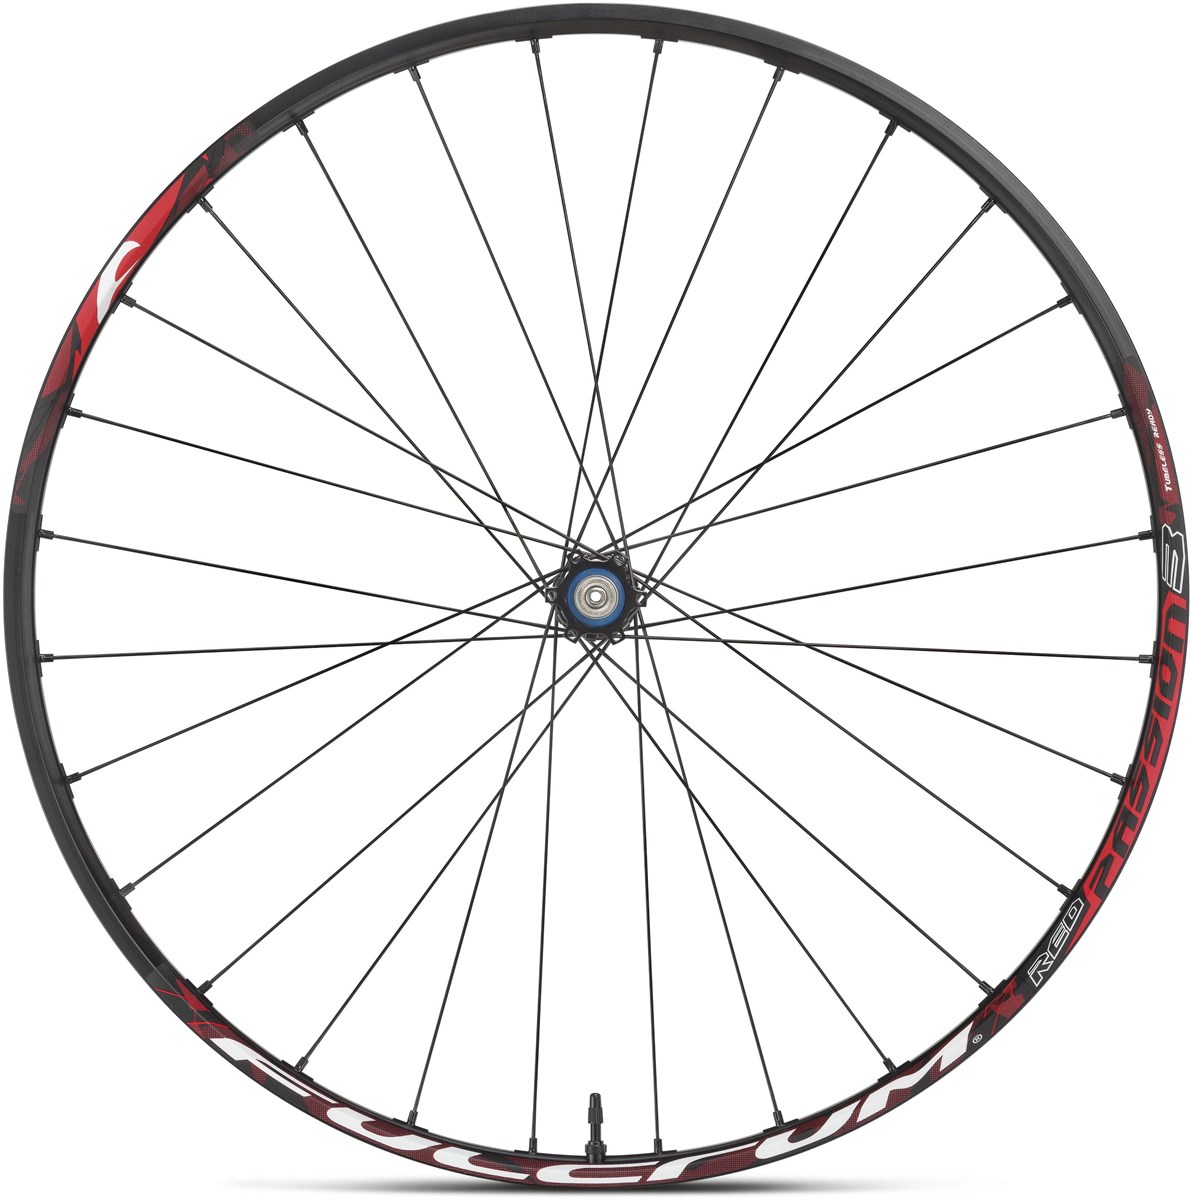 Fulcrum Red Passion 3 27.5" MTB Wheelset product image